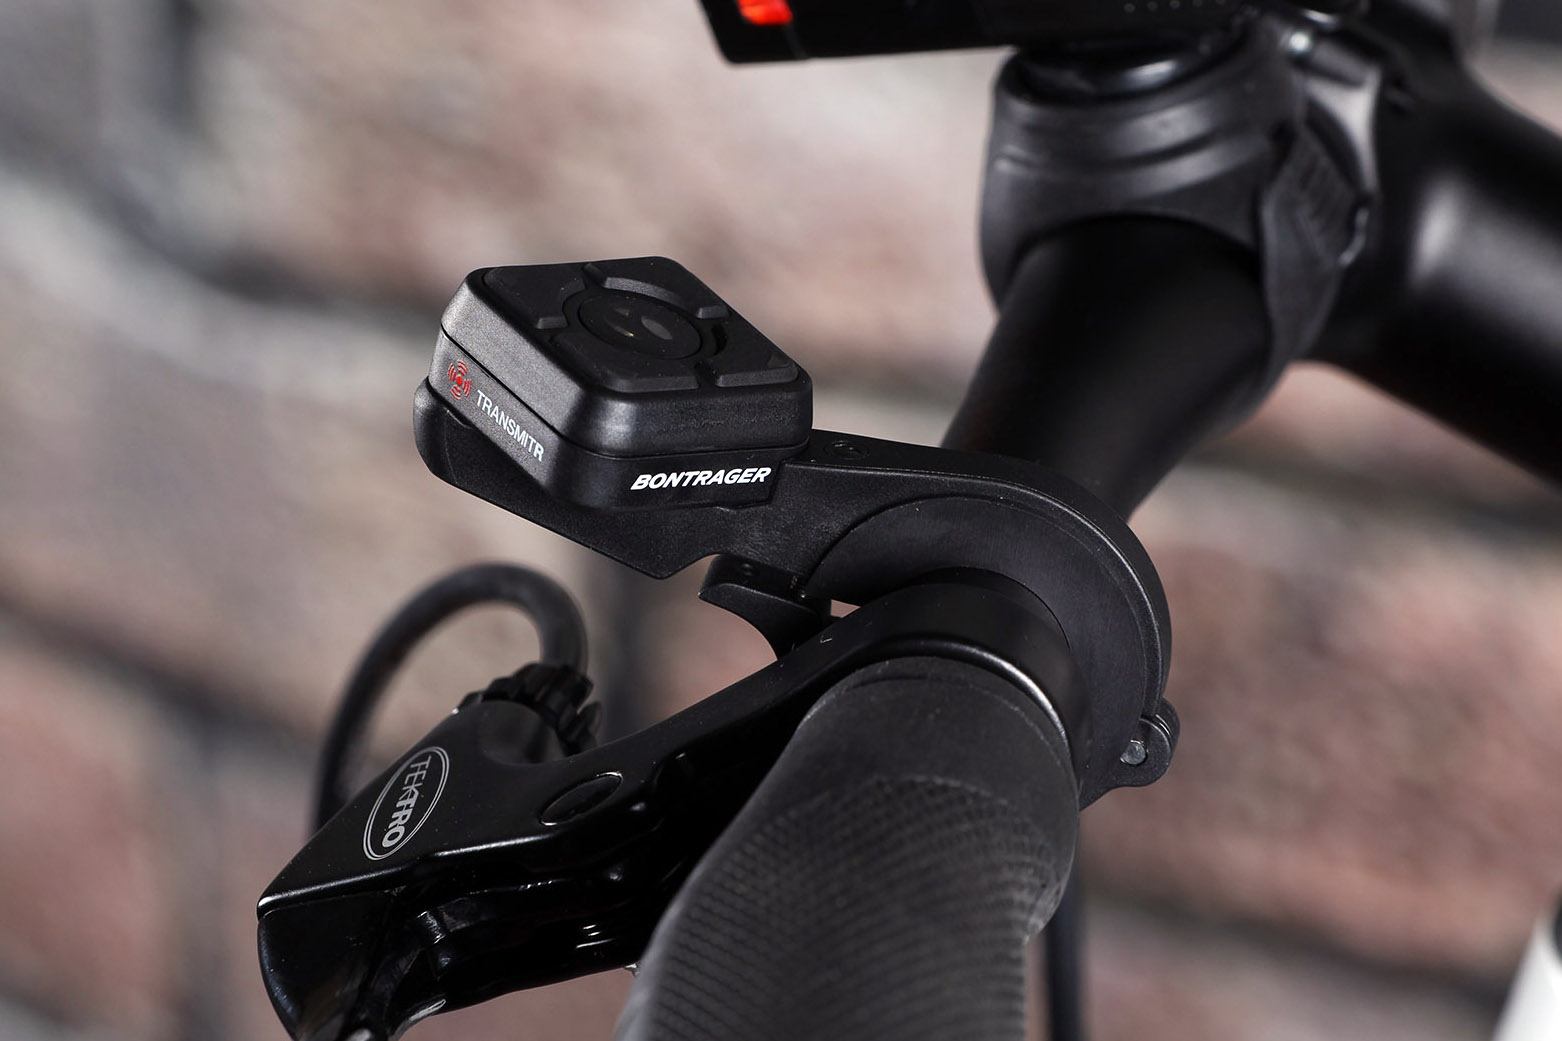 Review: Bontrager Transmitr Light Set and Wireless Remote | road.cc